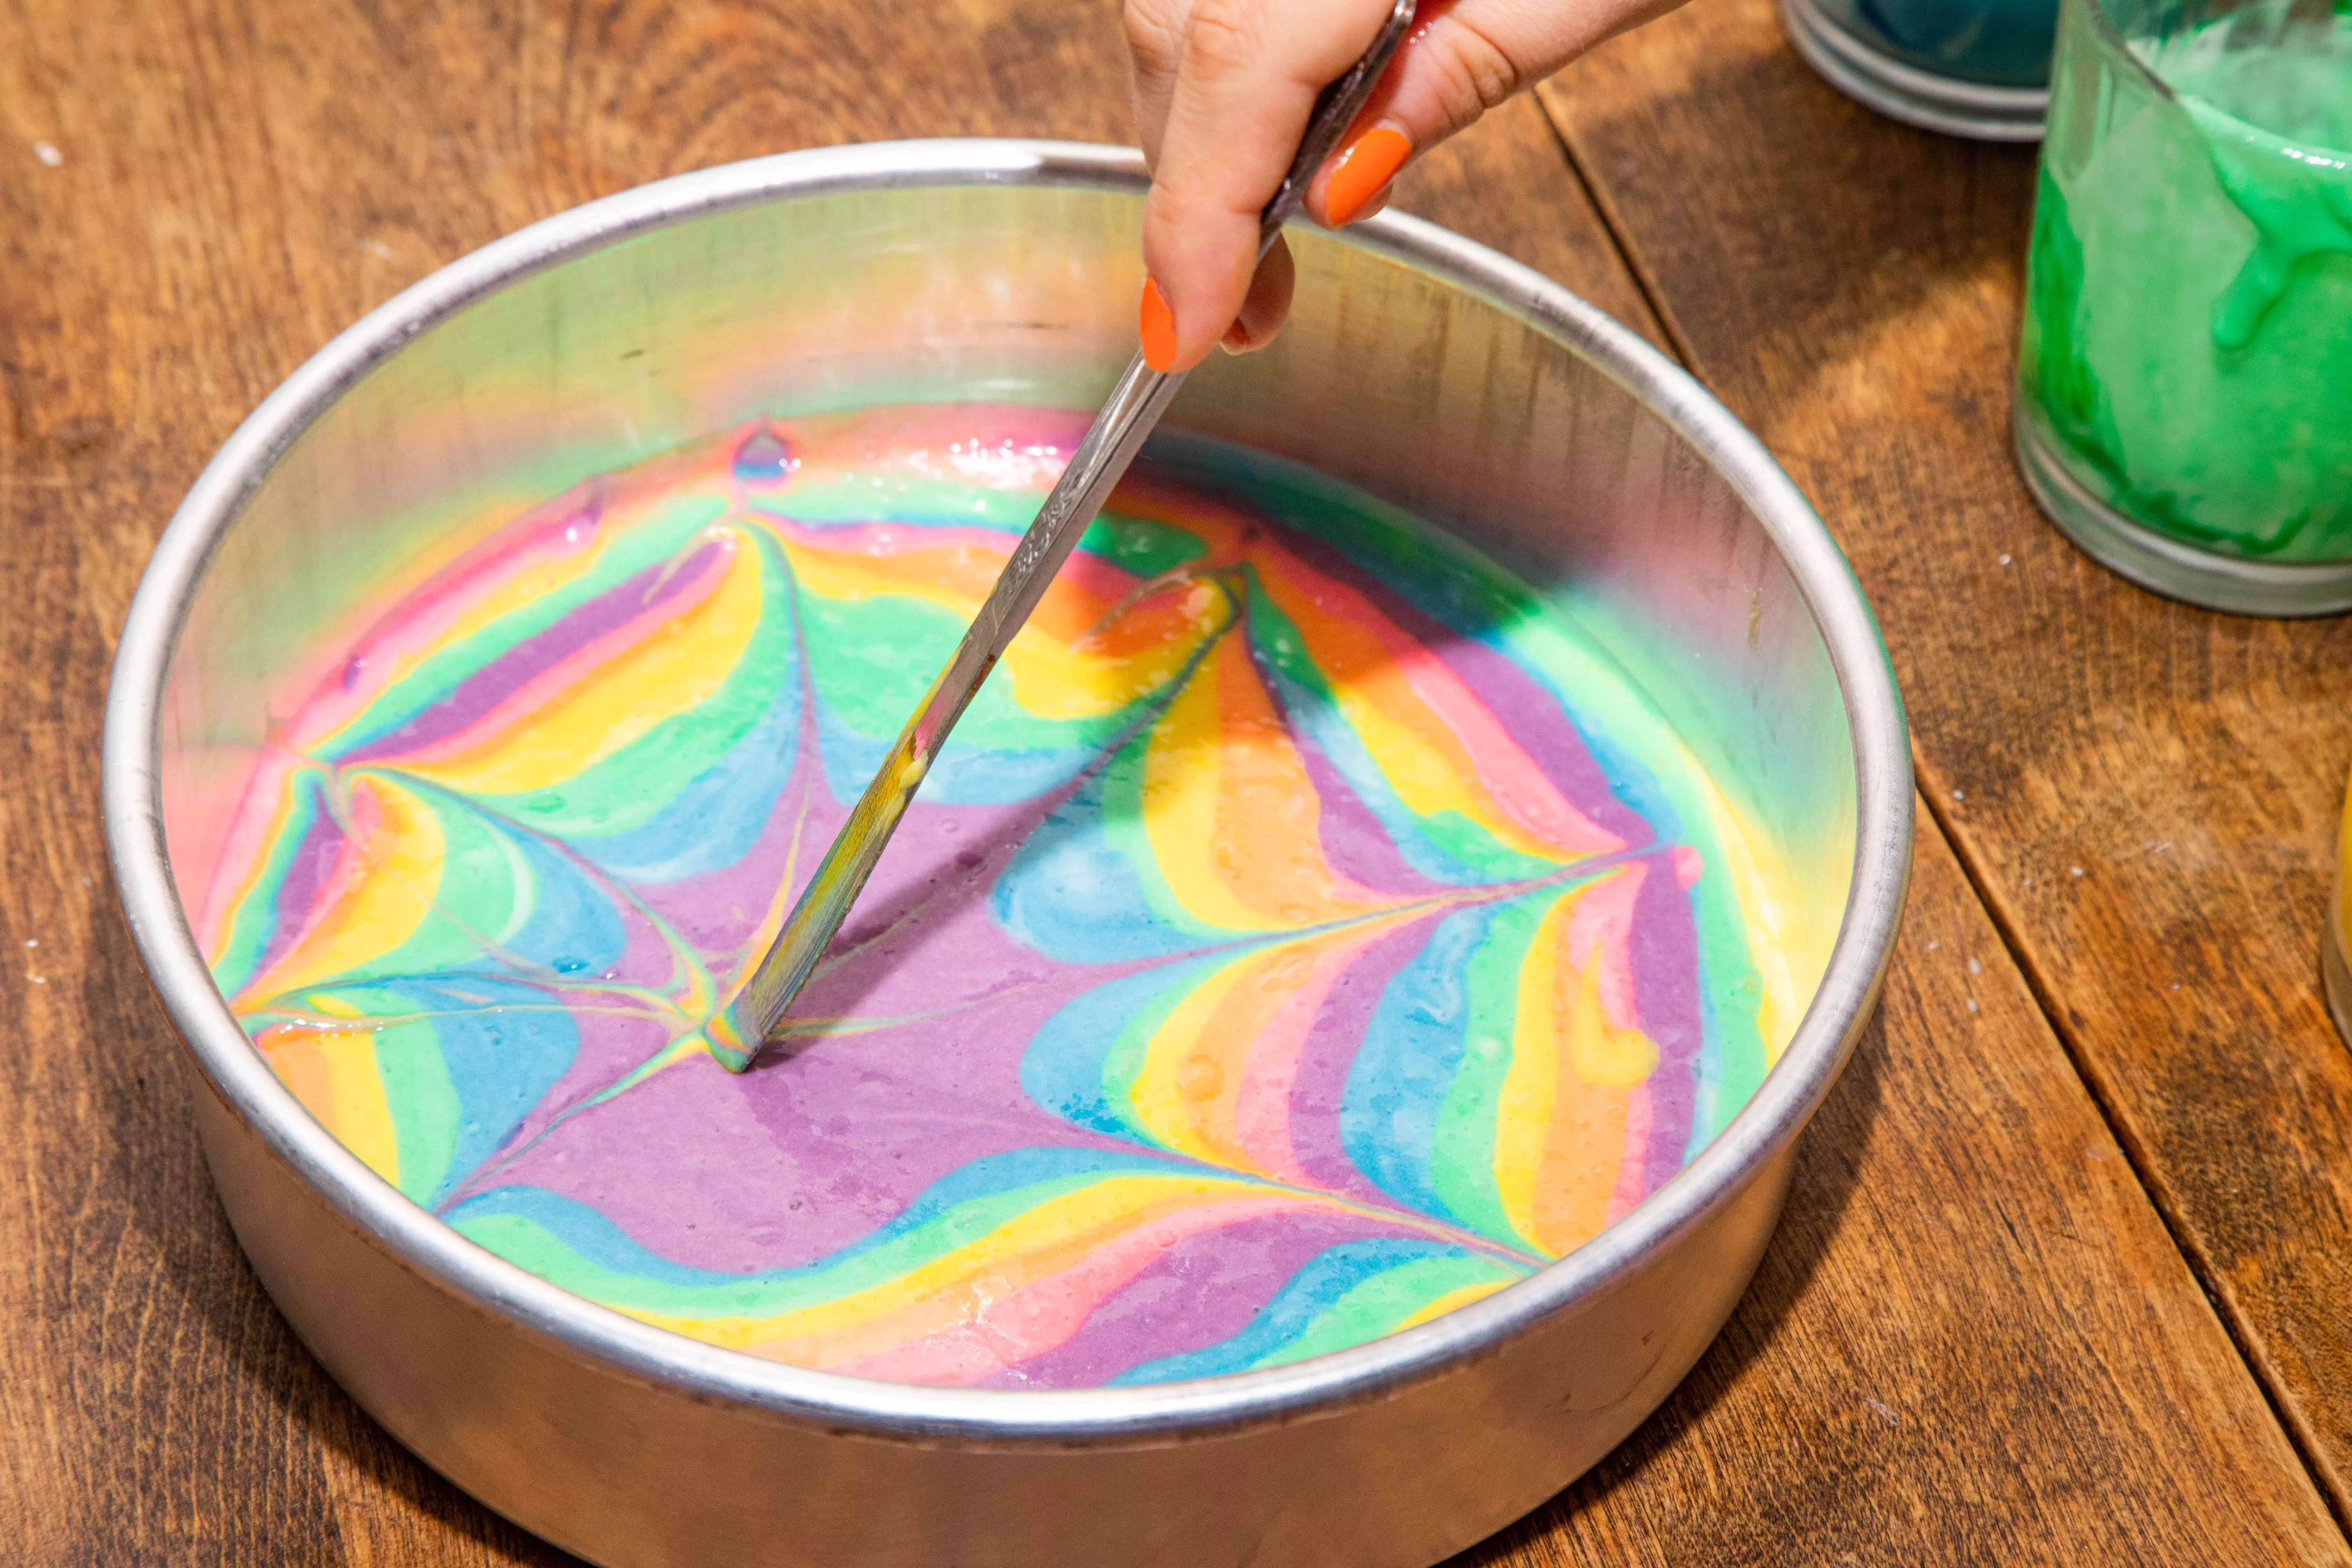 A hand holding a butter knife, using it to swirl tie-dye cake batter in a cake pan